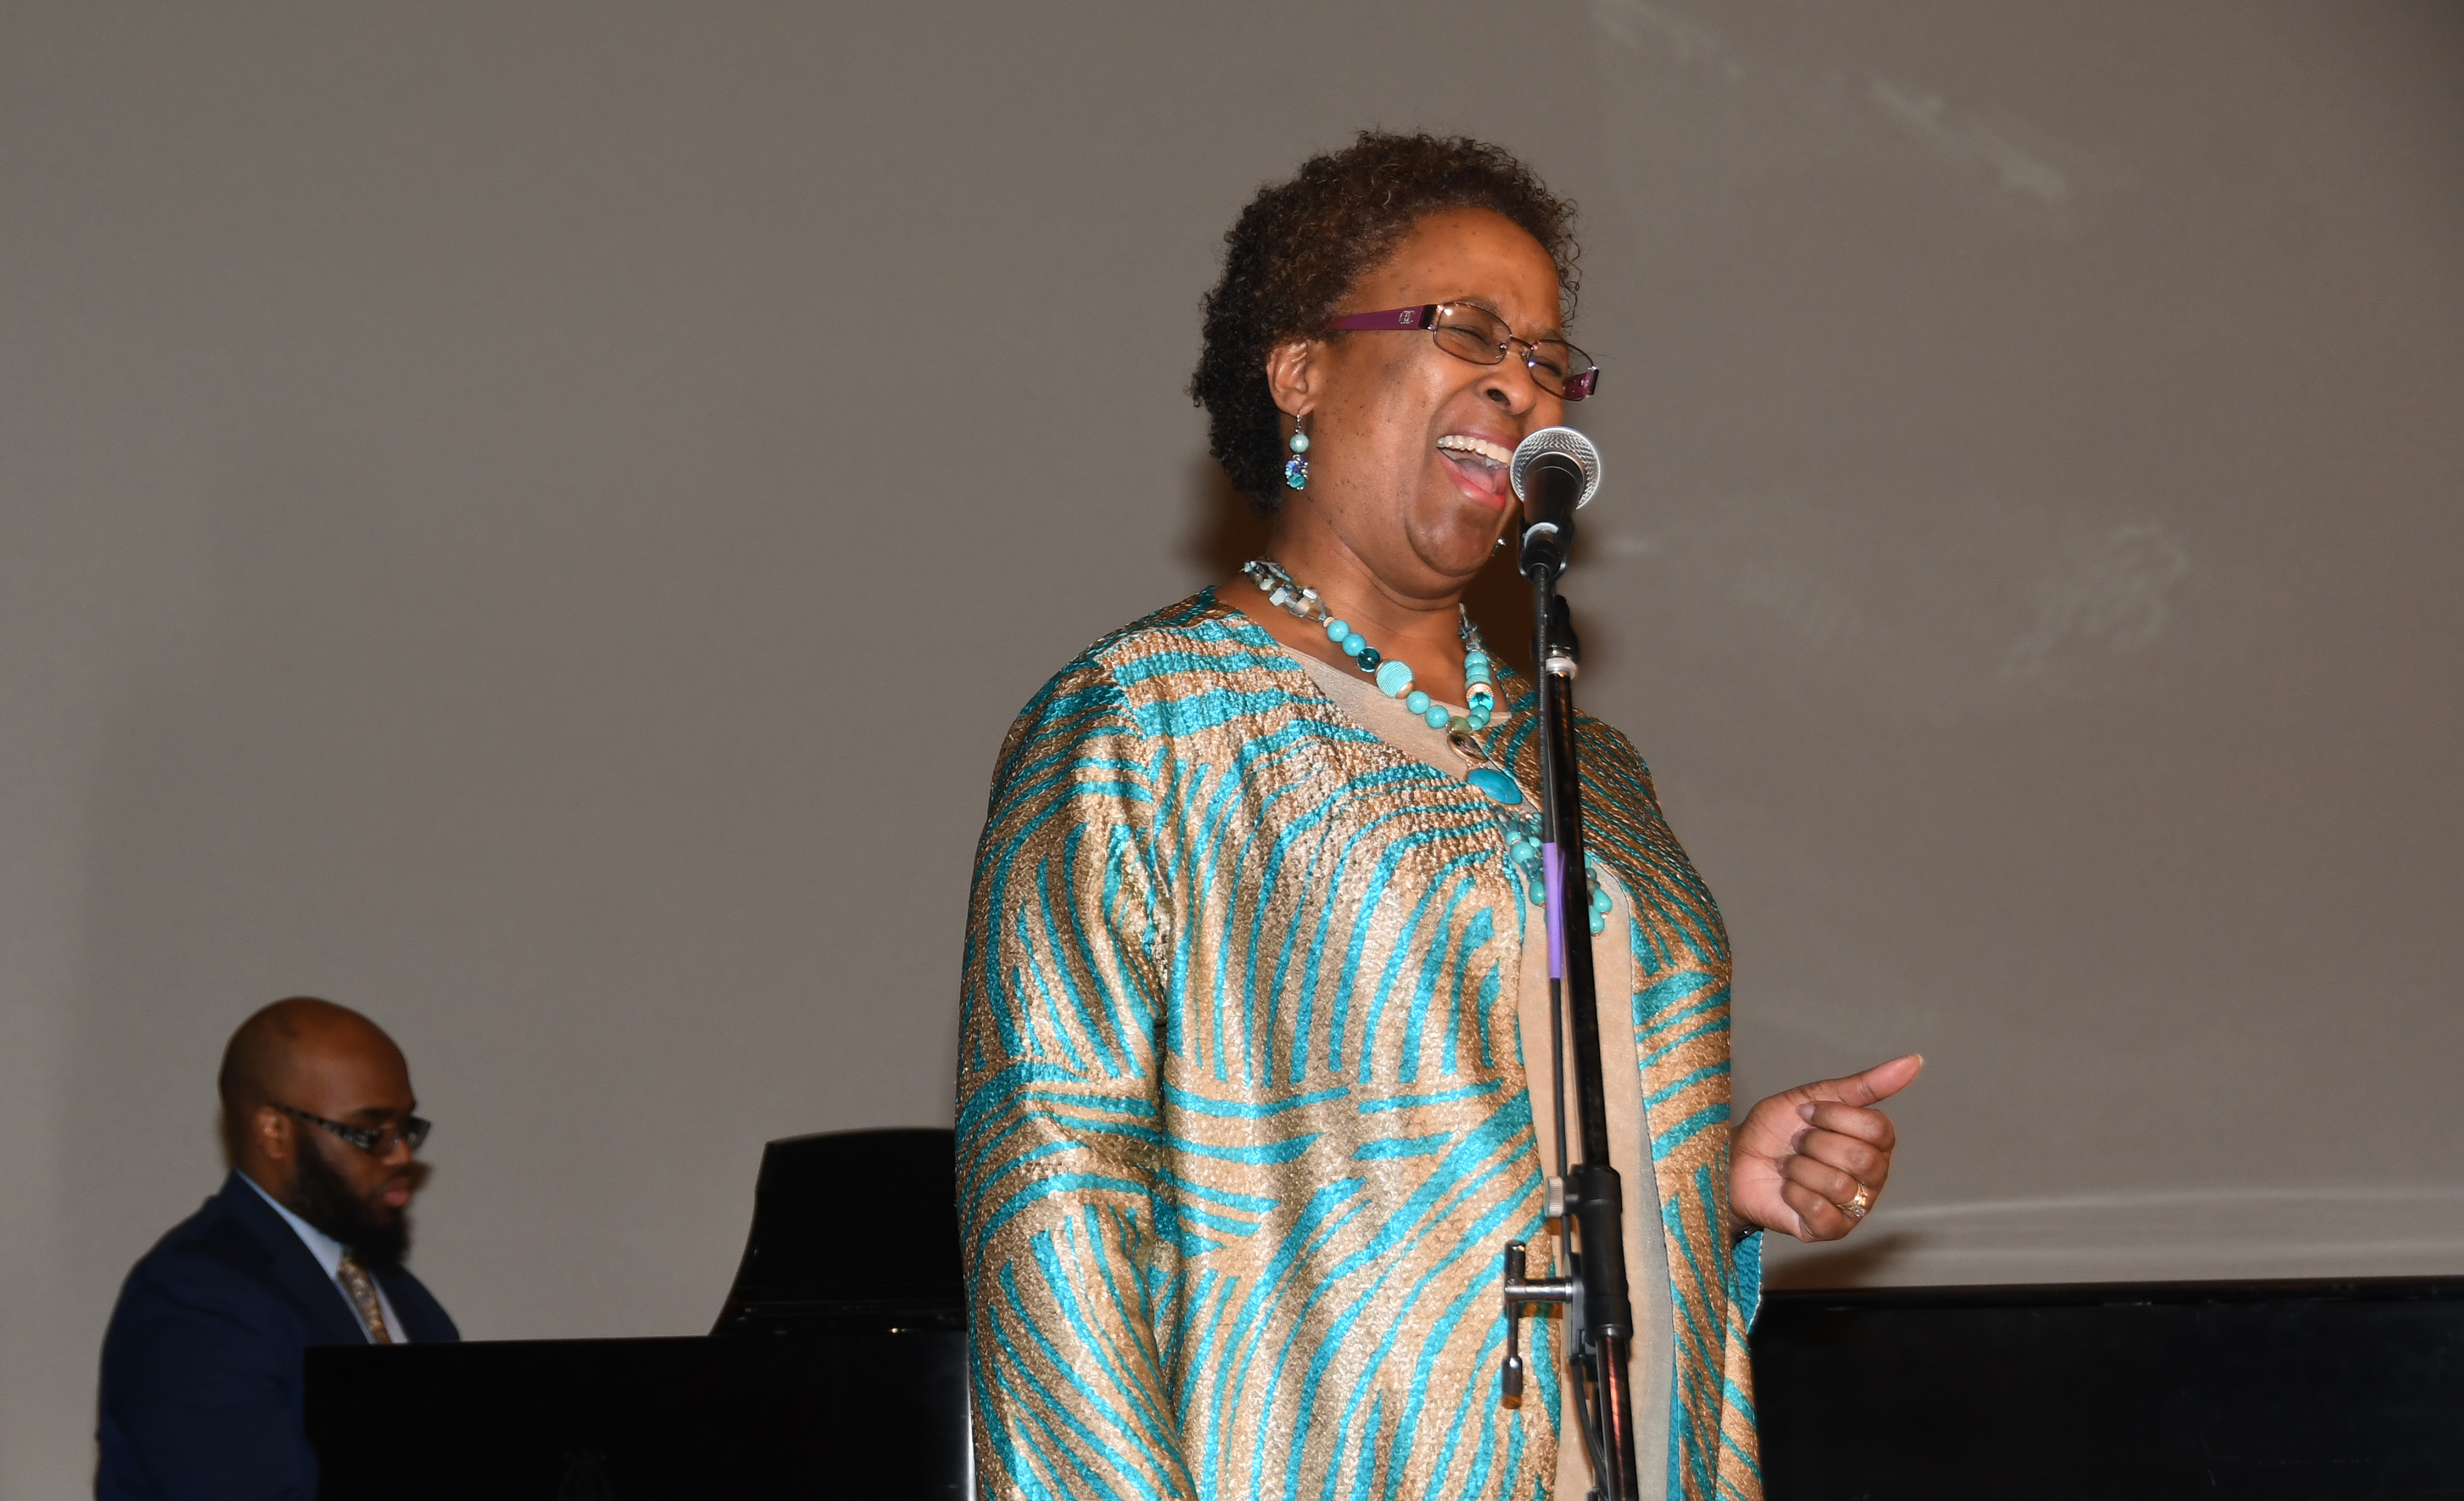 Dr. Marsha Horton, dean of the College of Health and Behavioral Sciences, puts on her music hat metaphorically and sings the National Anthem during the 33rd annual Martin Luther King Jr. National Holiday Program on campus. Photos by Judlin Pierre